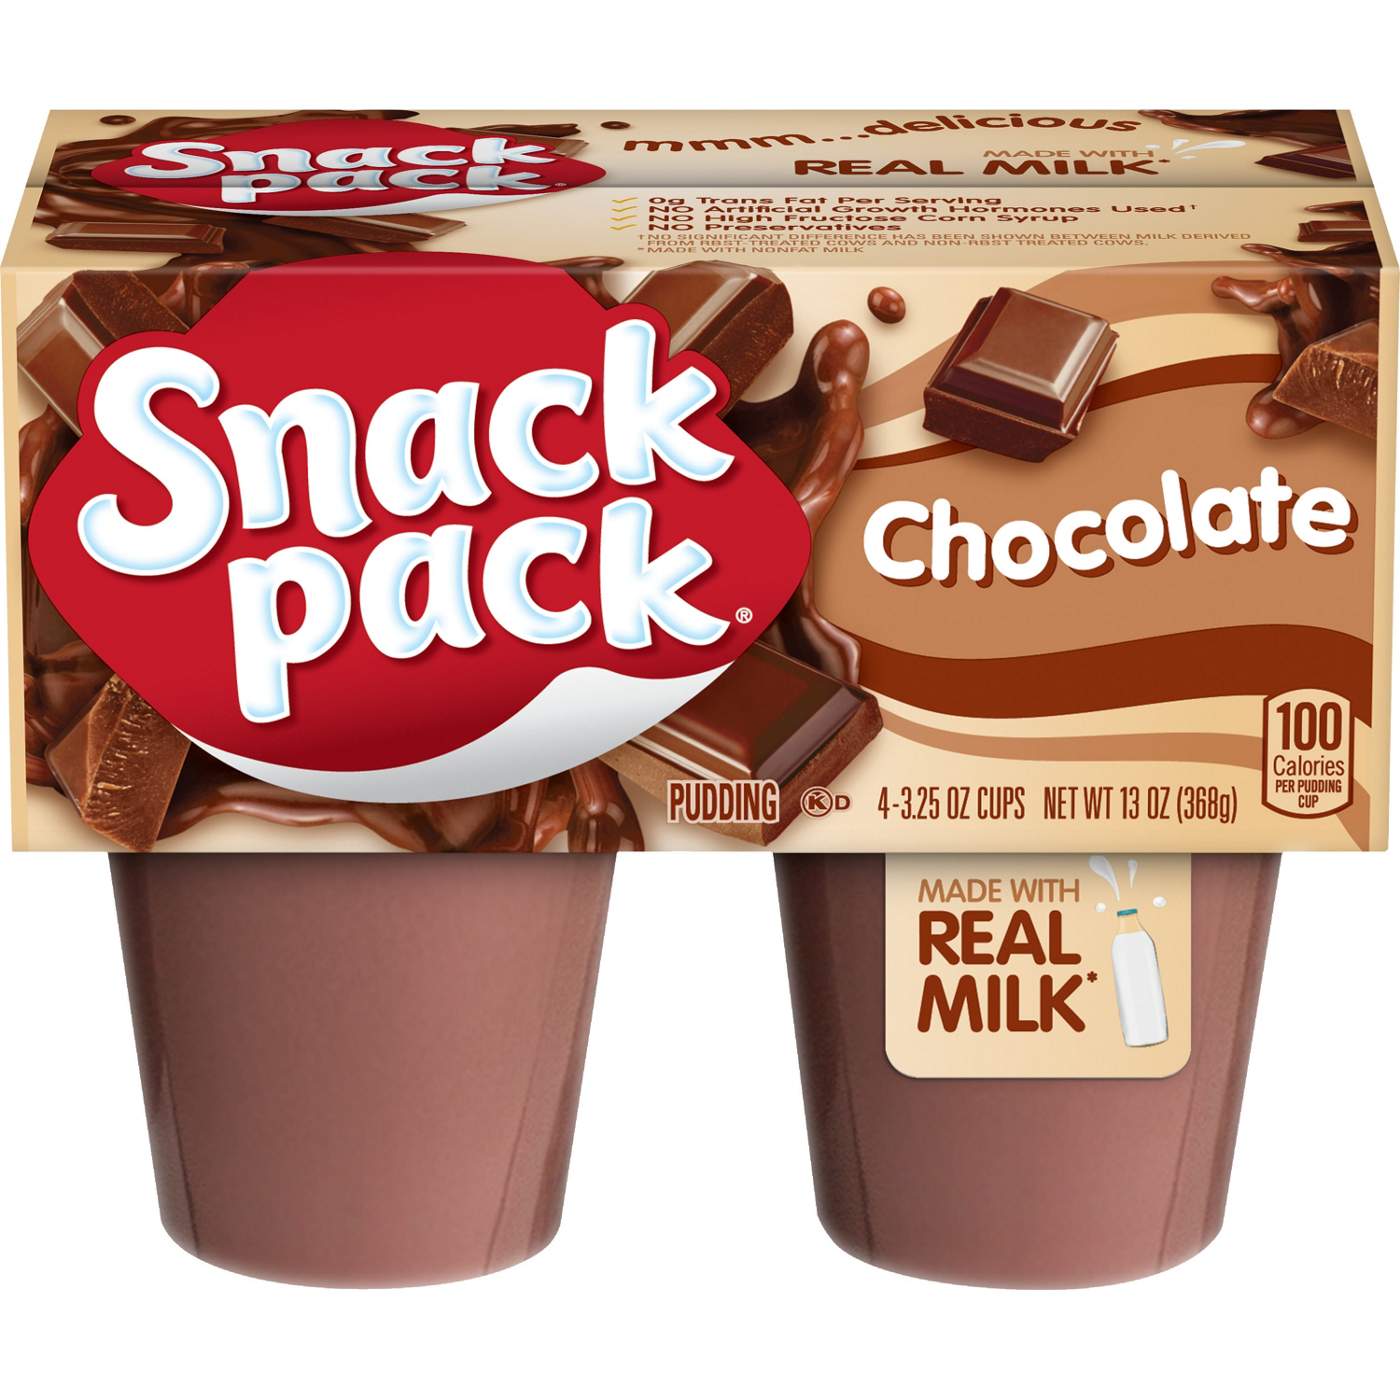 Snack Pack Chocolate Pudding Cups; image 1 of 7